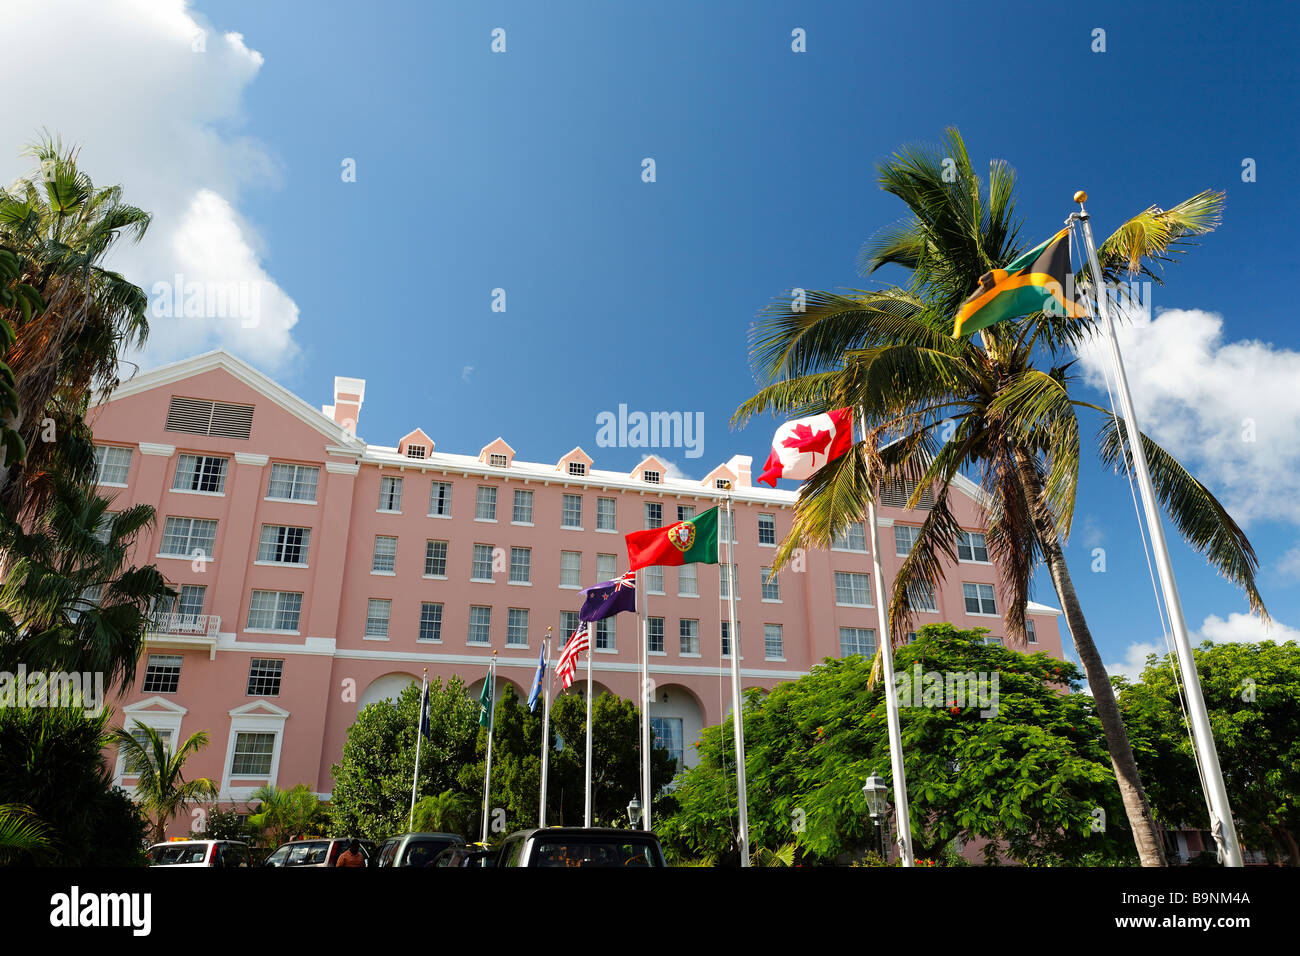 Low Angle View of a Hotel Front With Flags Hamilton Fairmont Princess Bermuda Stock Photo